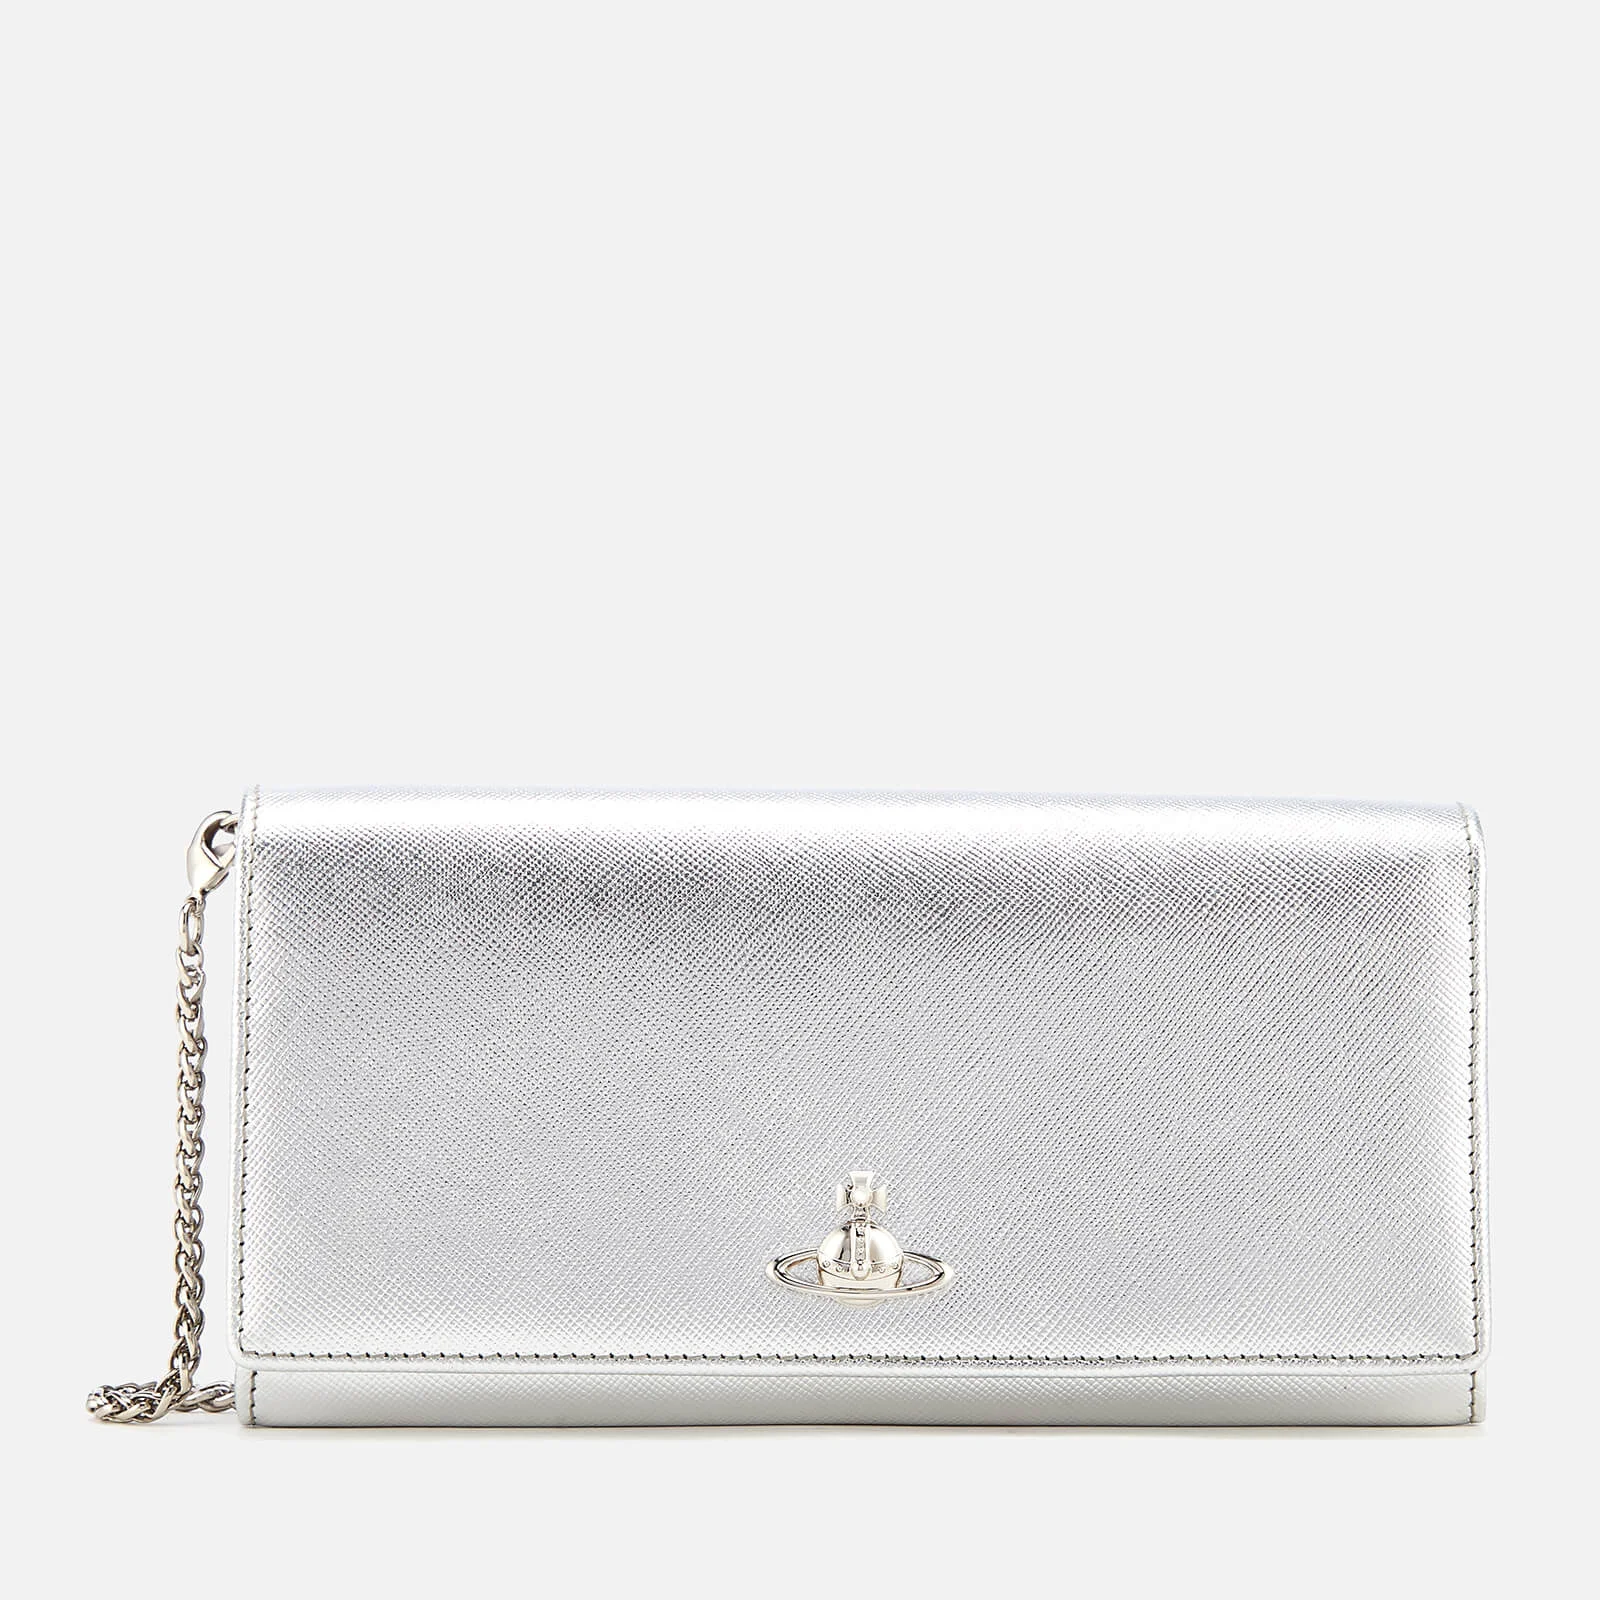 Vivienne Westwood Women's Pimlico Long Wallet with Chain - Silver Image 1